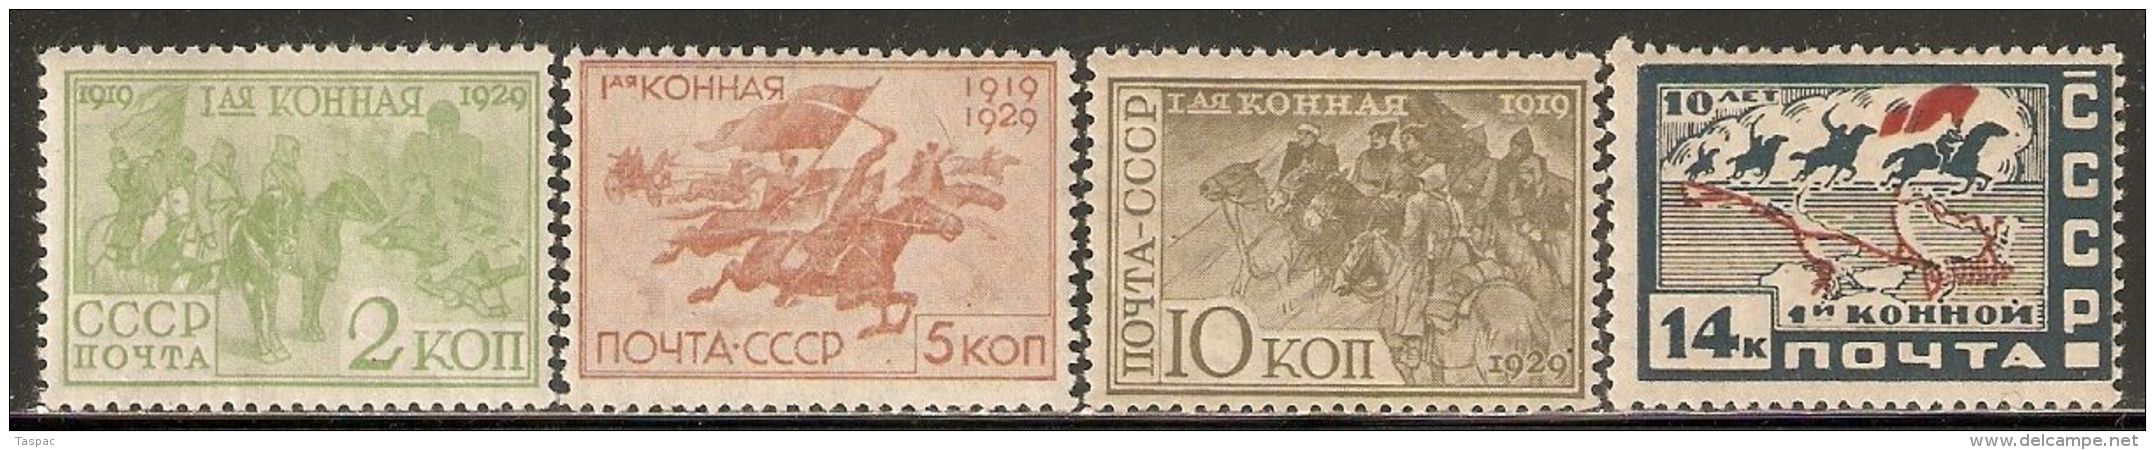 Russia / Soviet Union 1930 Mi# 385-387 * MH - 1st Red Cavalry Army, 10th Anniv. - Unused Stamps